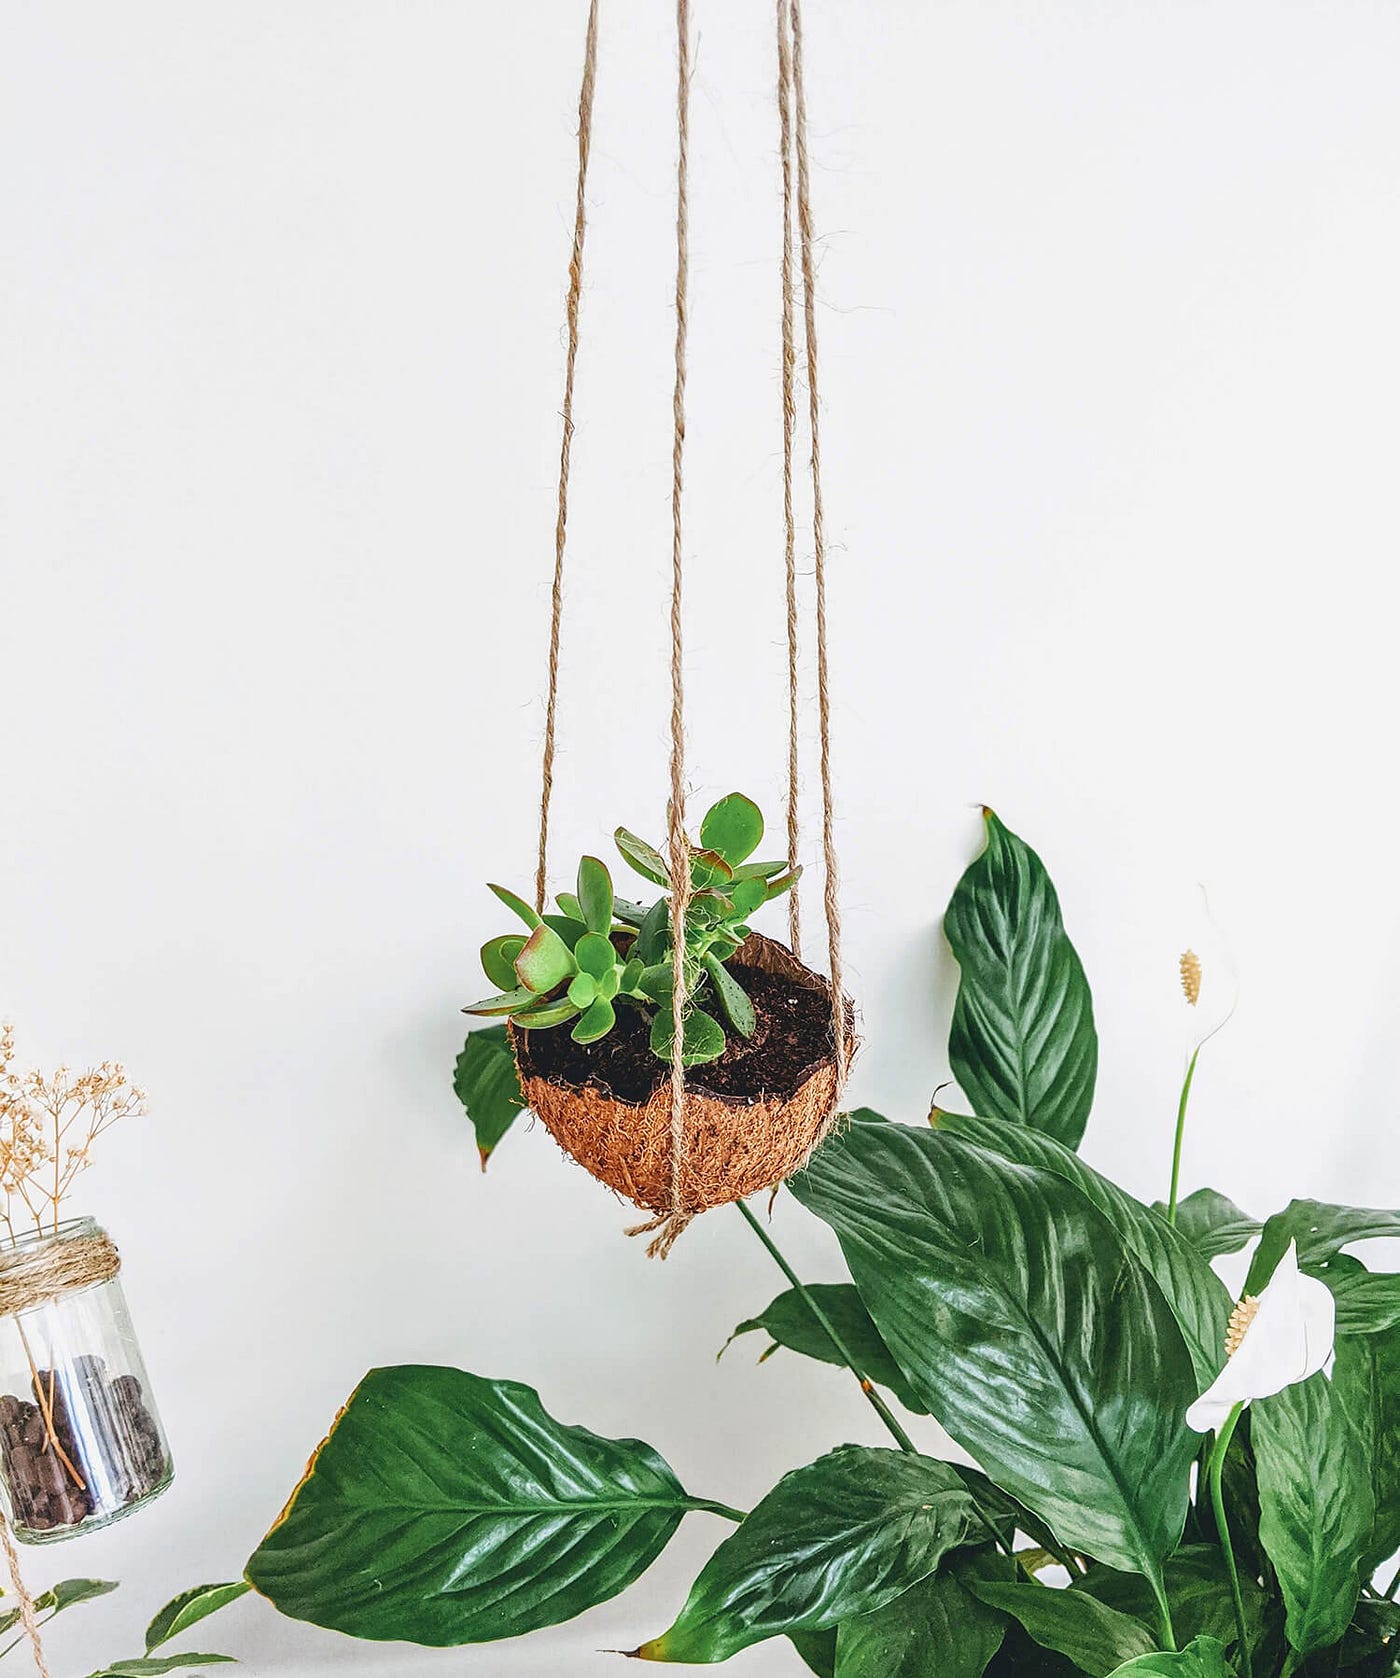 Easy, Cheap, and DIY-able Coconut Shell Planters, by Barbulianno Design